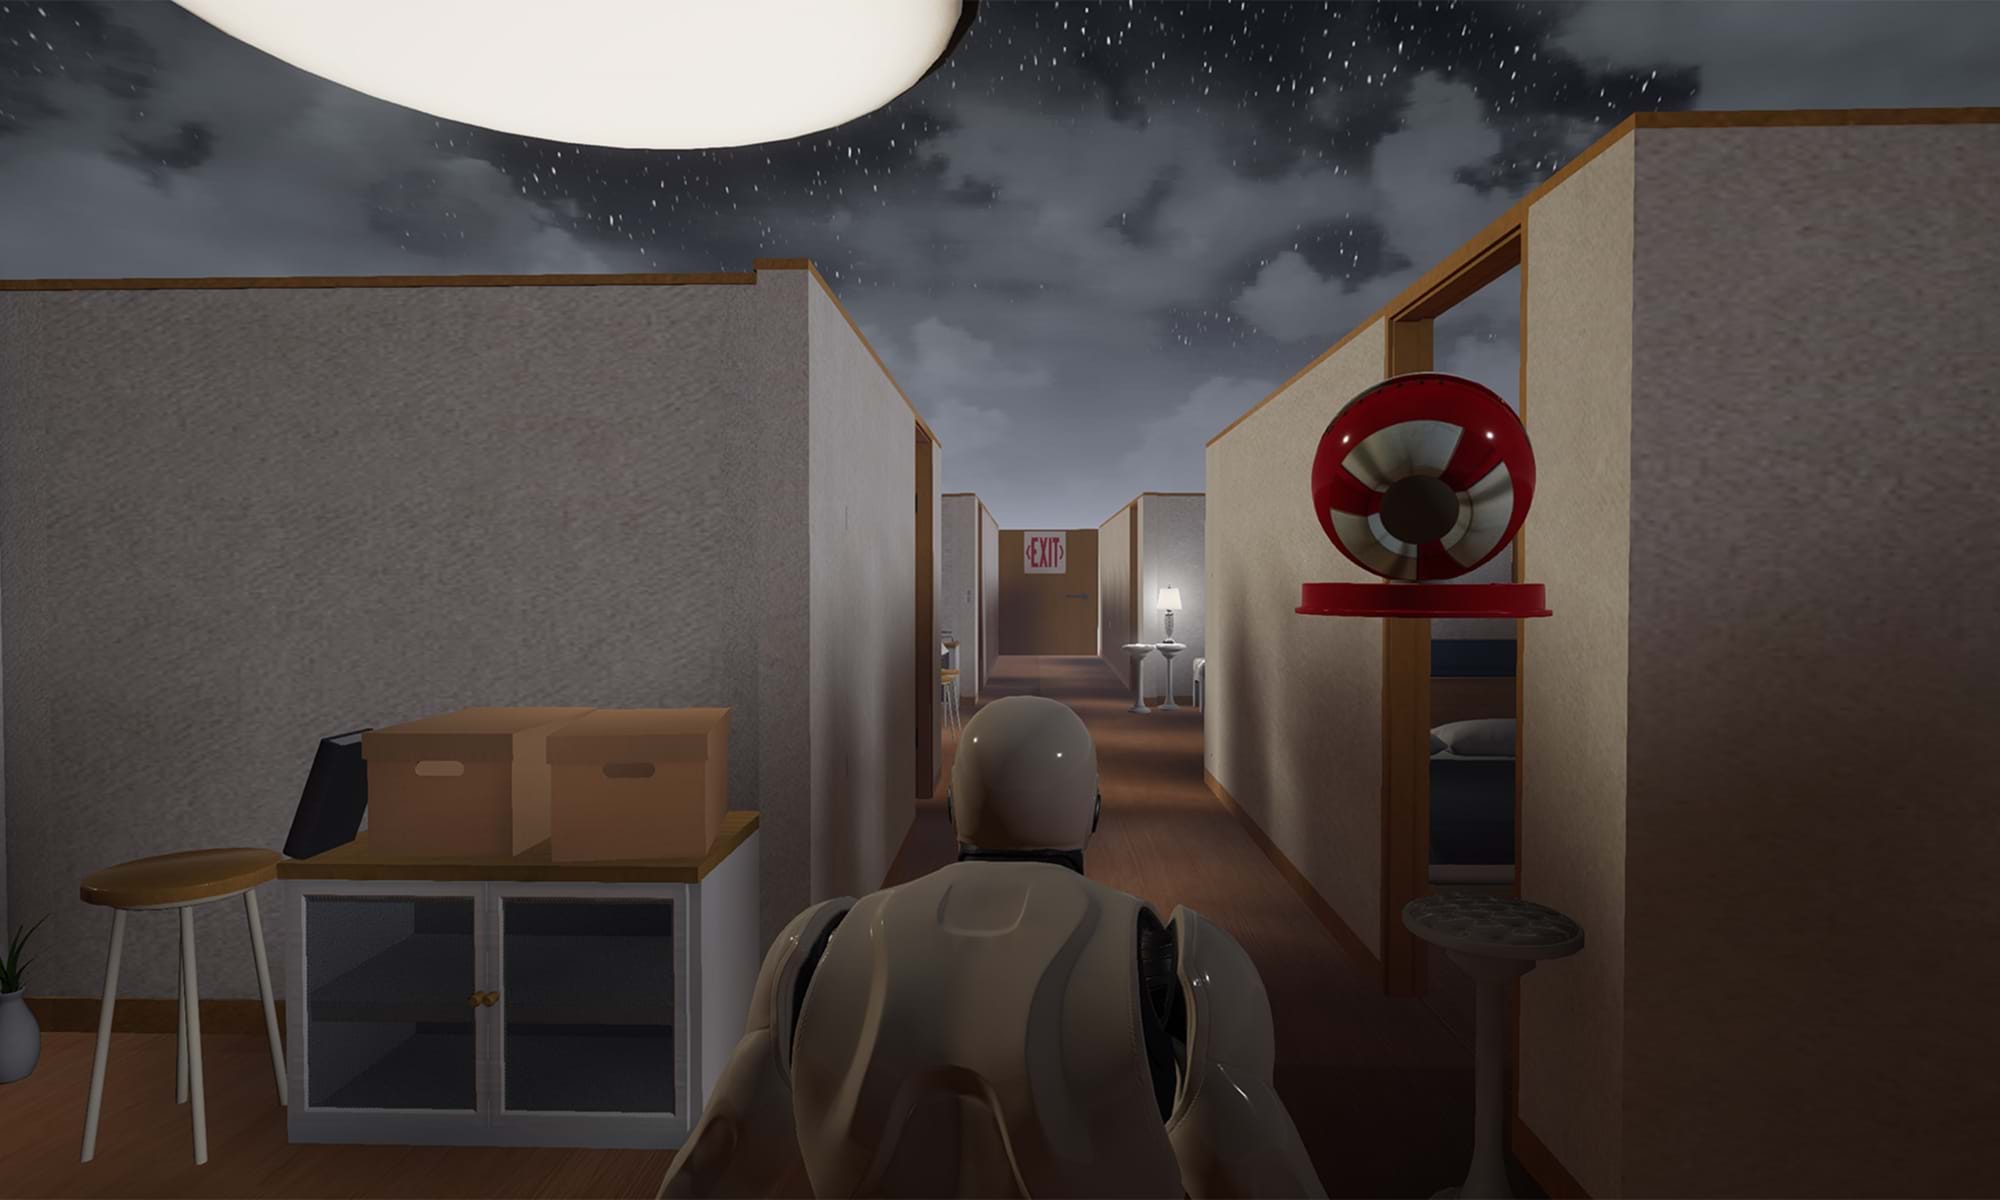 “Virtual Classroom - Educational Game” is a 2020 Digital Graduate Show project by Samuel Lambie, a student at Abertay University.